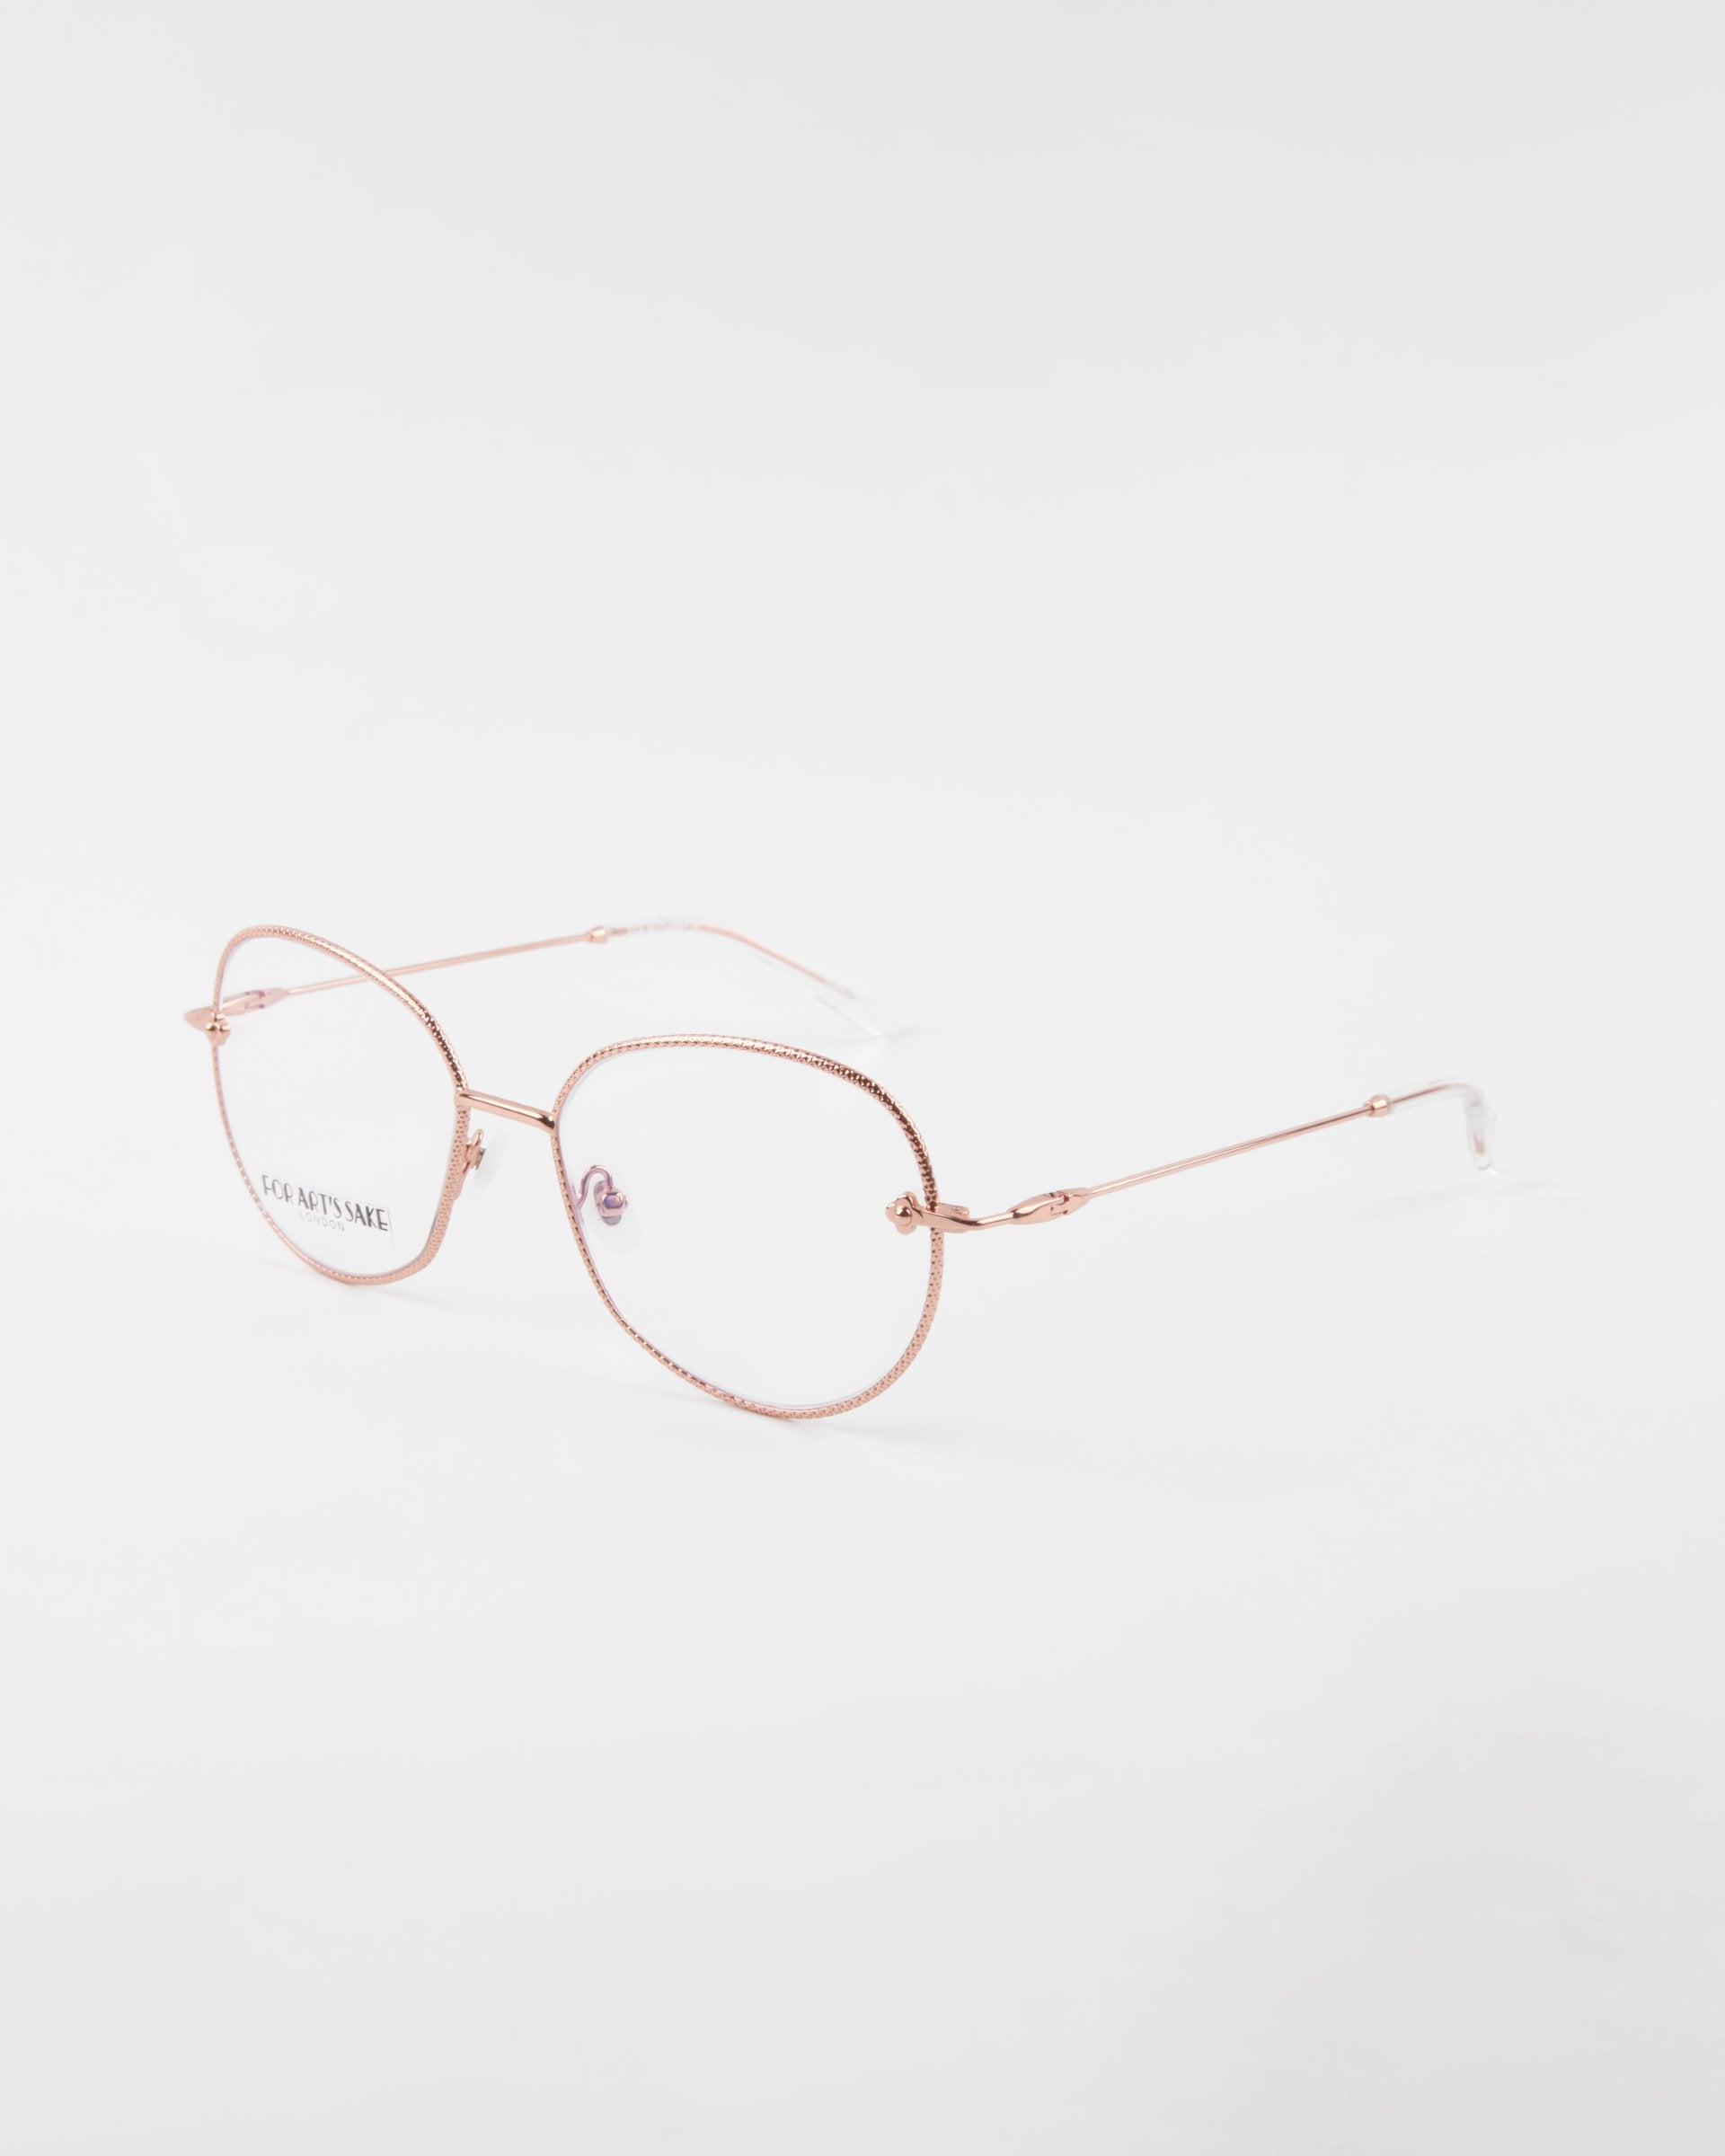 A pair of Jasmine eyeglasses by For Art&#39;s Sake® with a thin and delicate frame is displayed against a white background. The handmade eyewear boasts ovoid lenses, clear nose pads, and a minimalist, elegant design. Crafted from gold-plated stainless steel, the arms are straight with a slight curve at the ends.